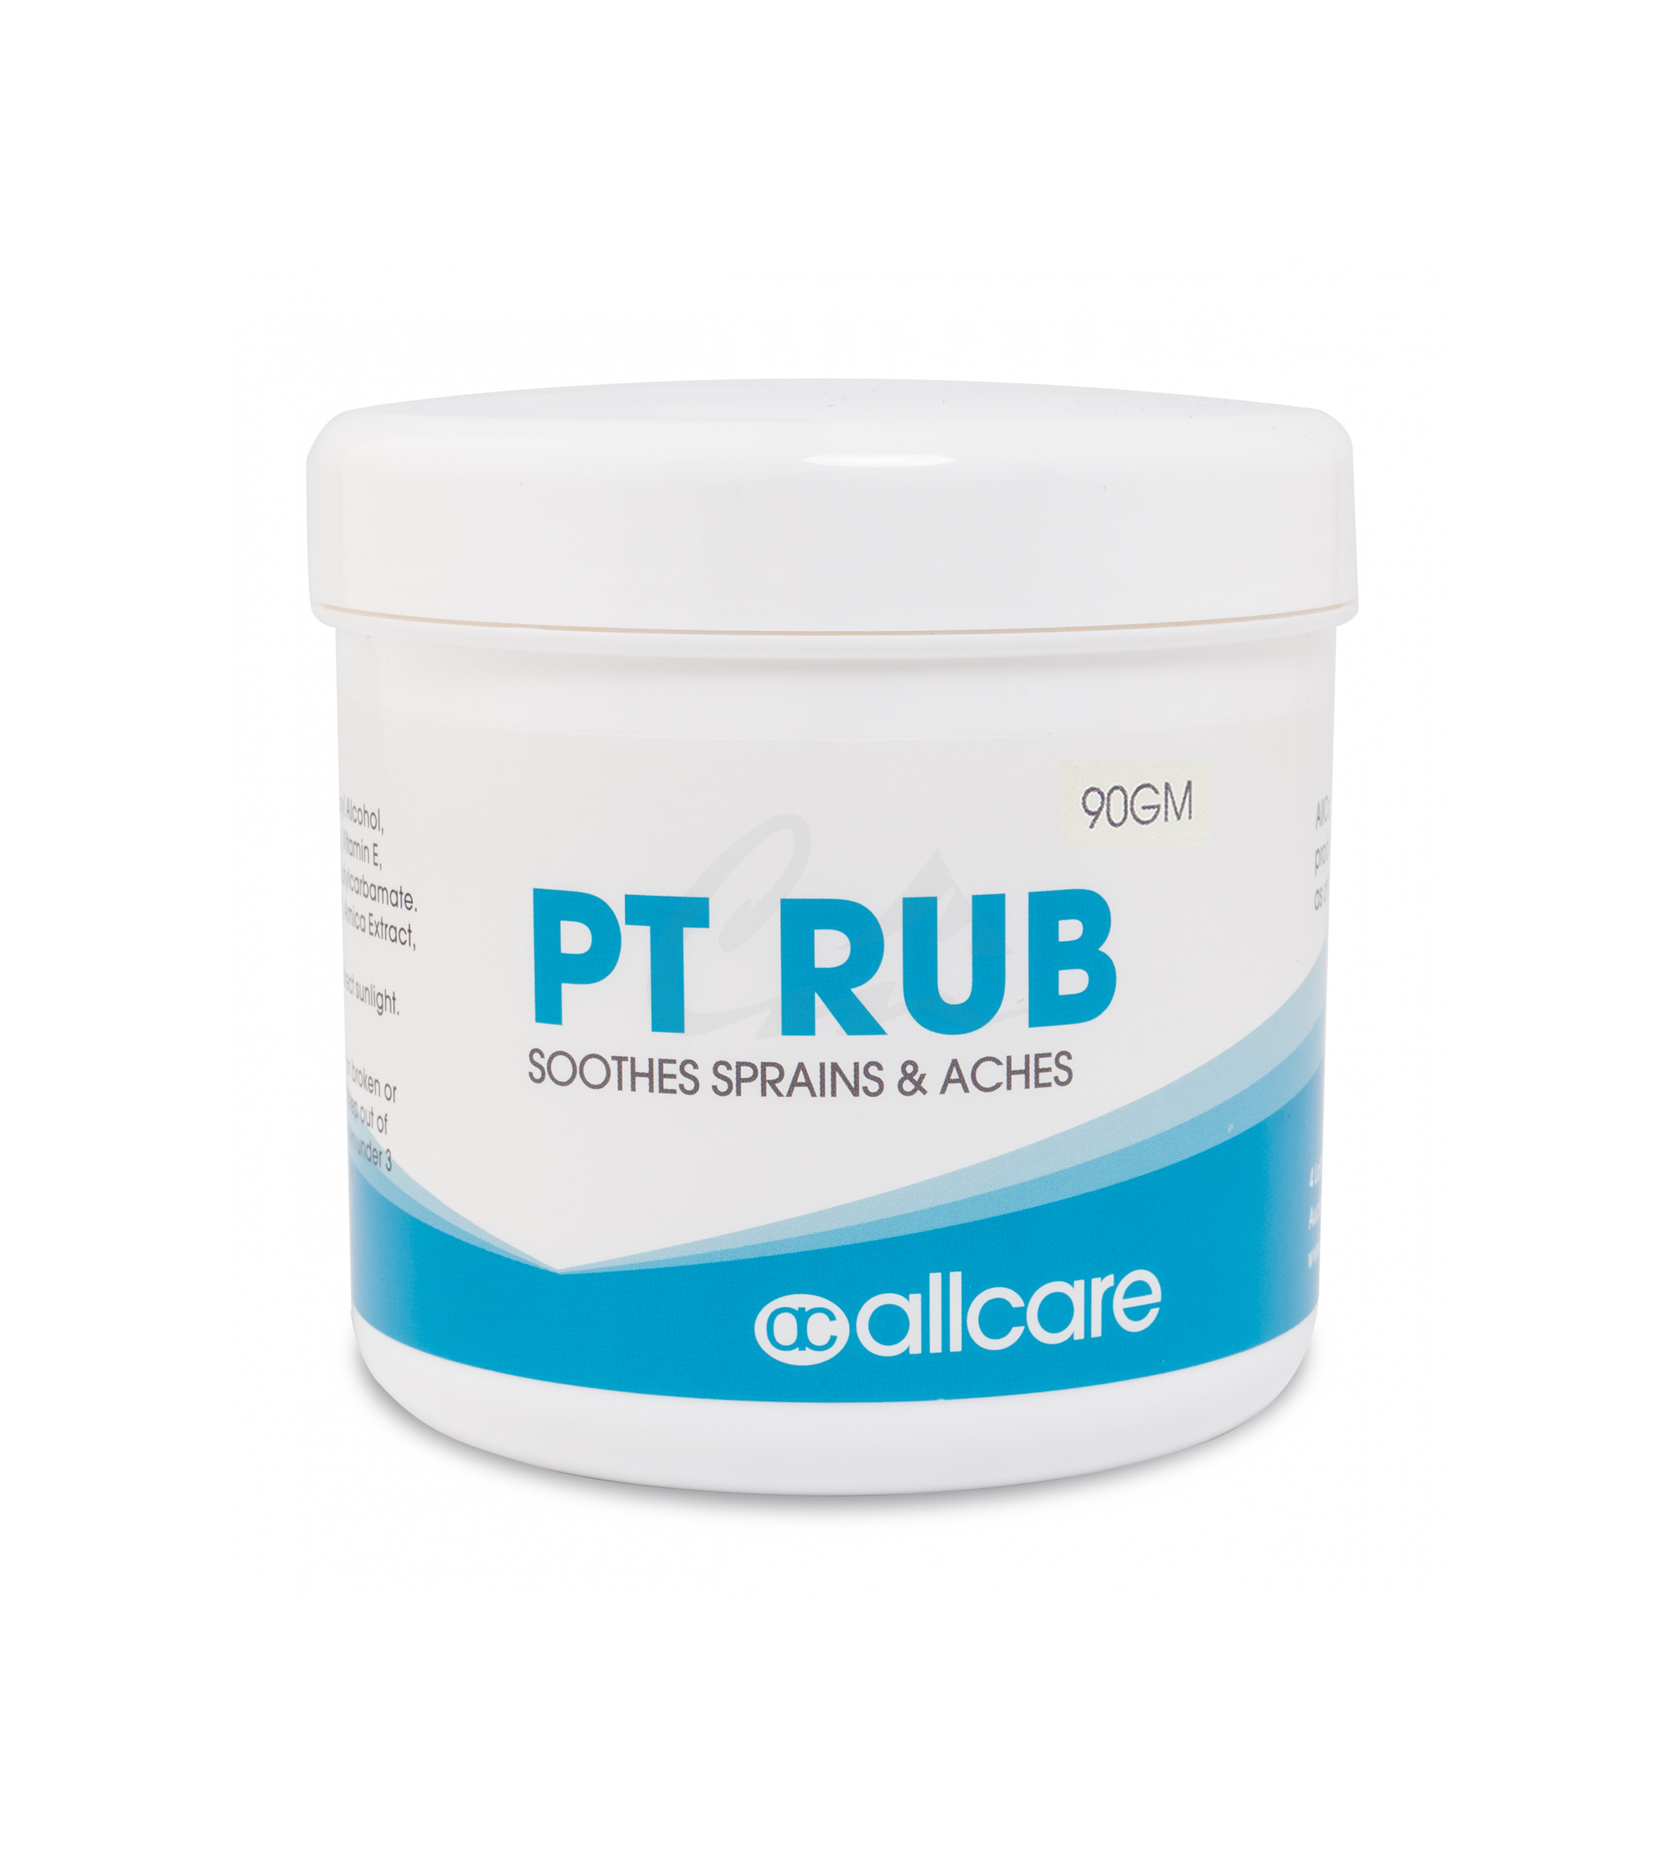 Allcare PT Rub Reduces Swelling and Pain 90gm Pot